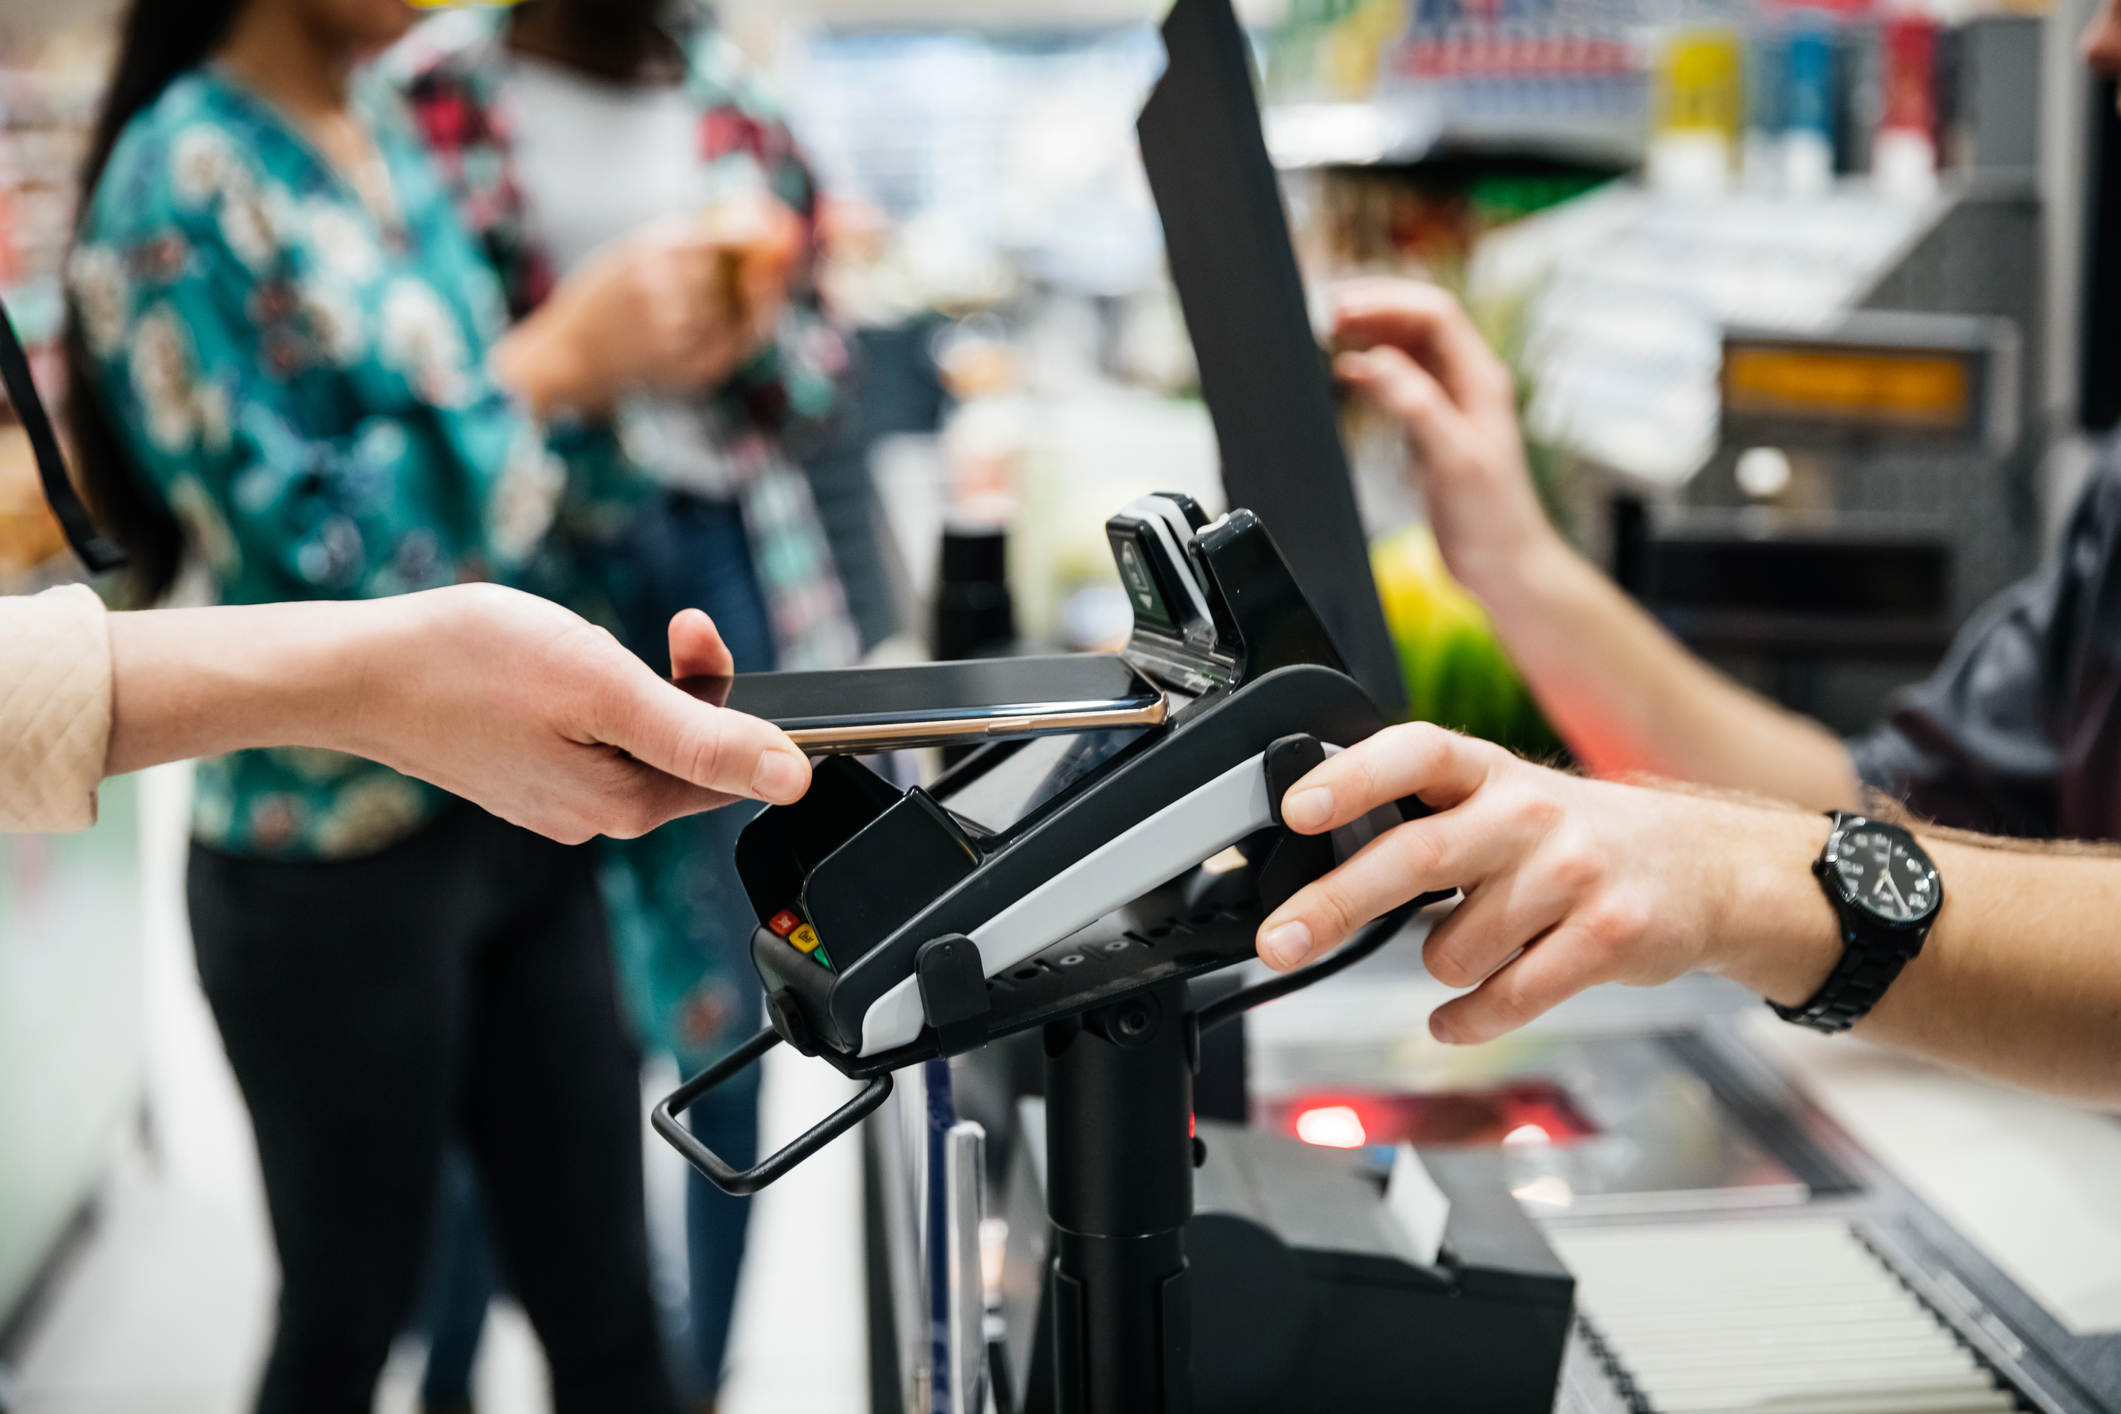 A close up of a contactless payment being made using a smartphone at the supermarket.